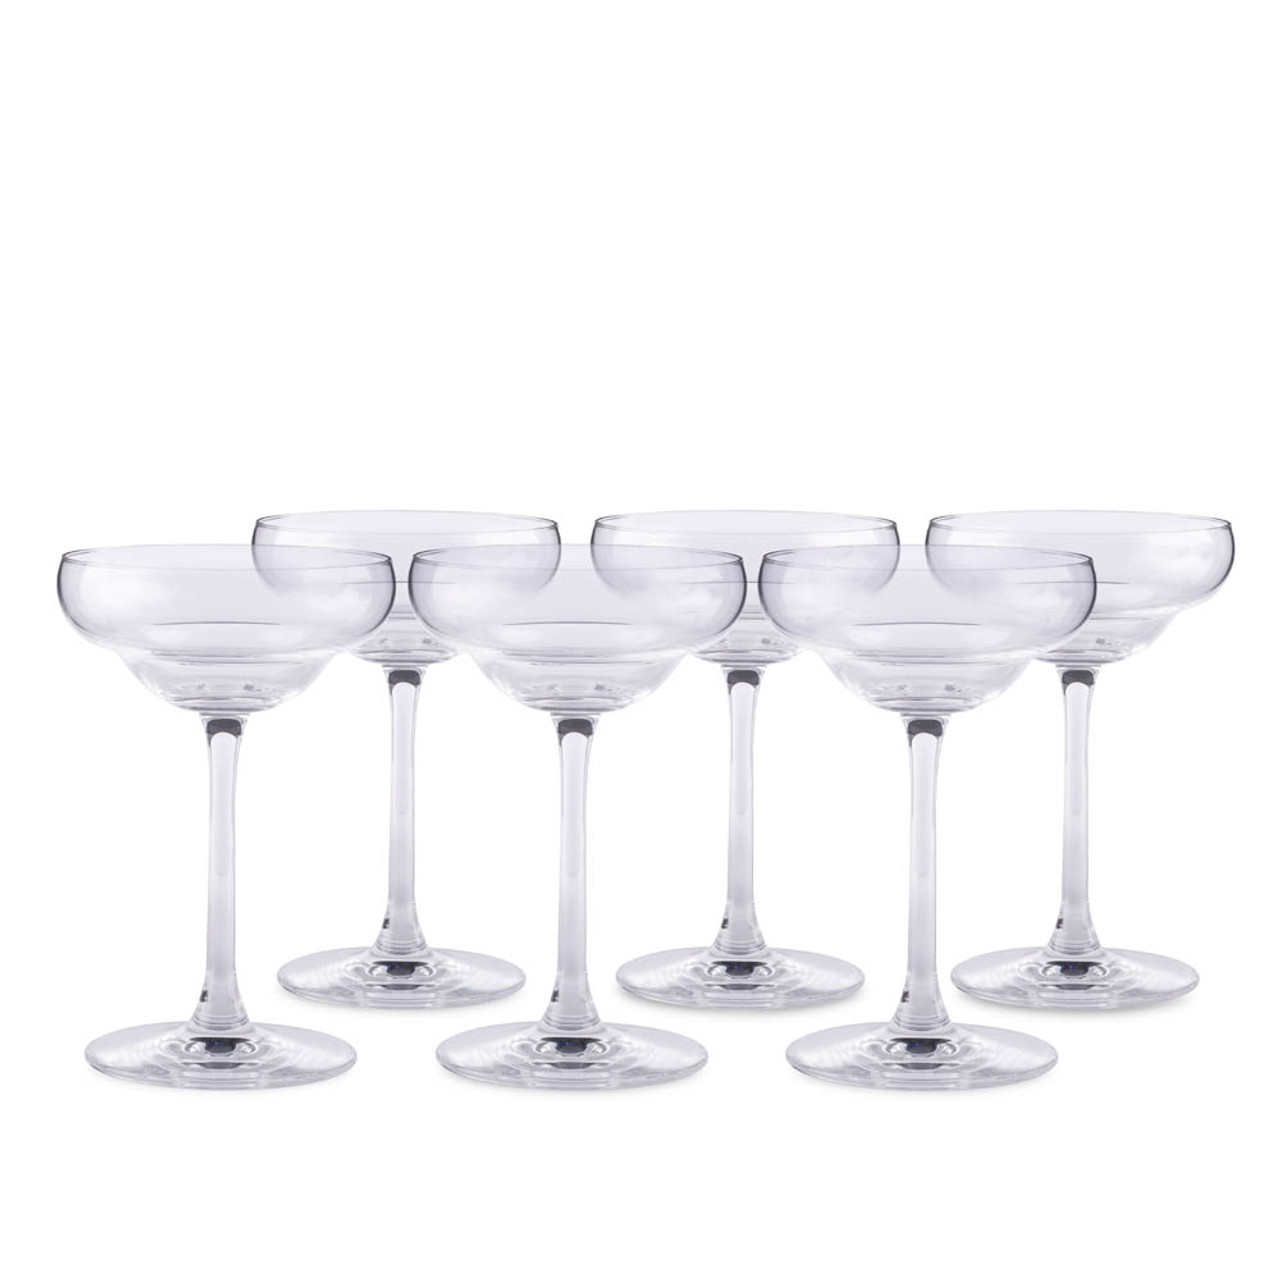 https://cdn11.bigcommerce.com/s-cznxq08r7/images/stencil/1280x1280/products/870/9336/ub2978-urban_bar_coley_crystal_coupe_glasses_-_5.8_oz_-_set_of_6-2_1__30956.1590772604.jpg?c=1